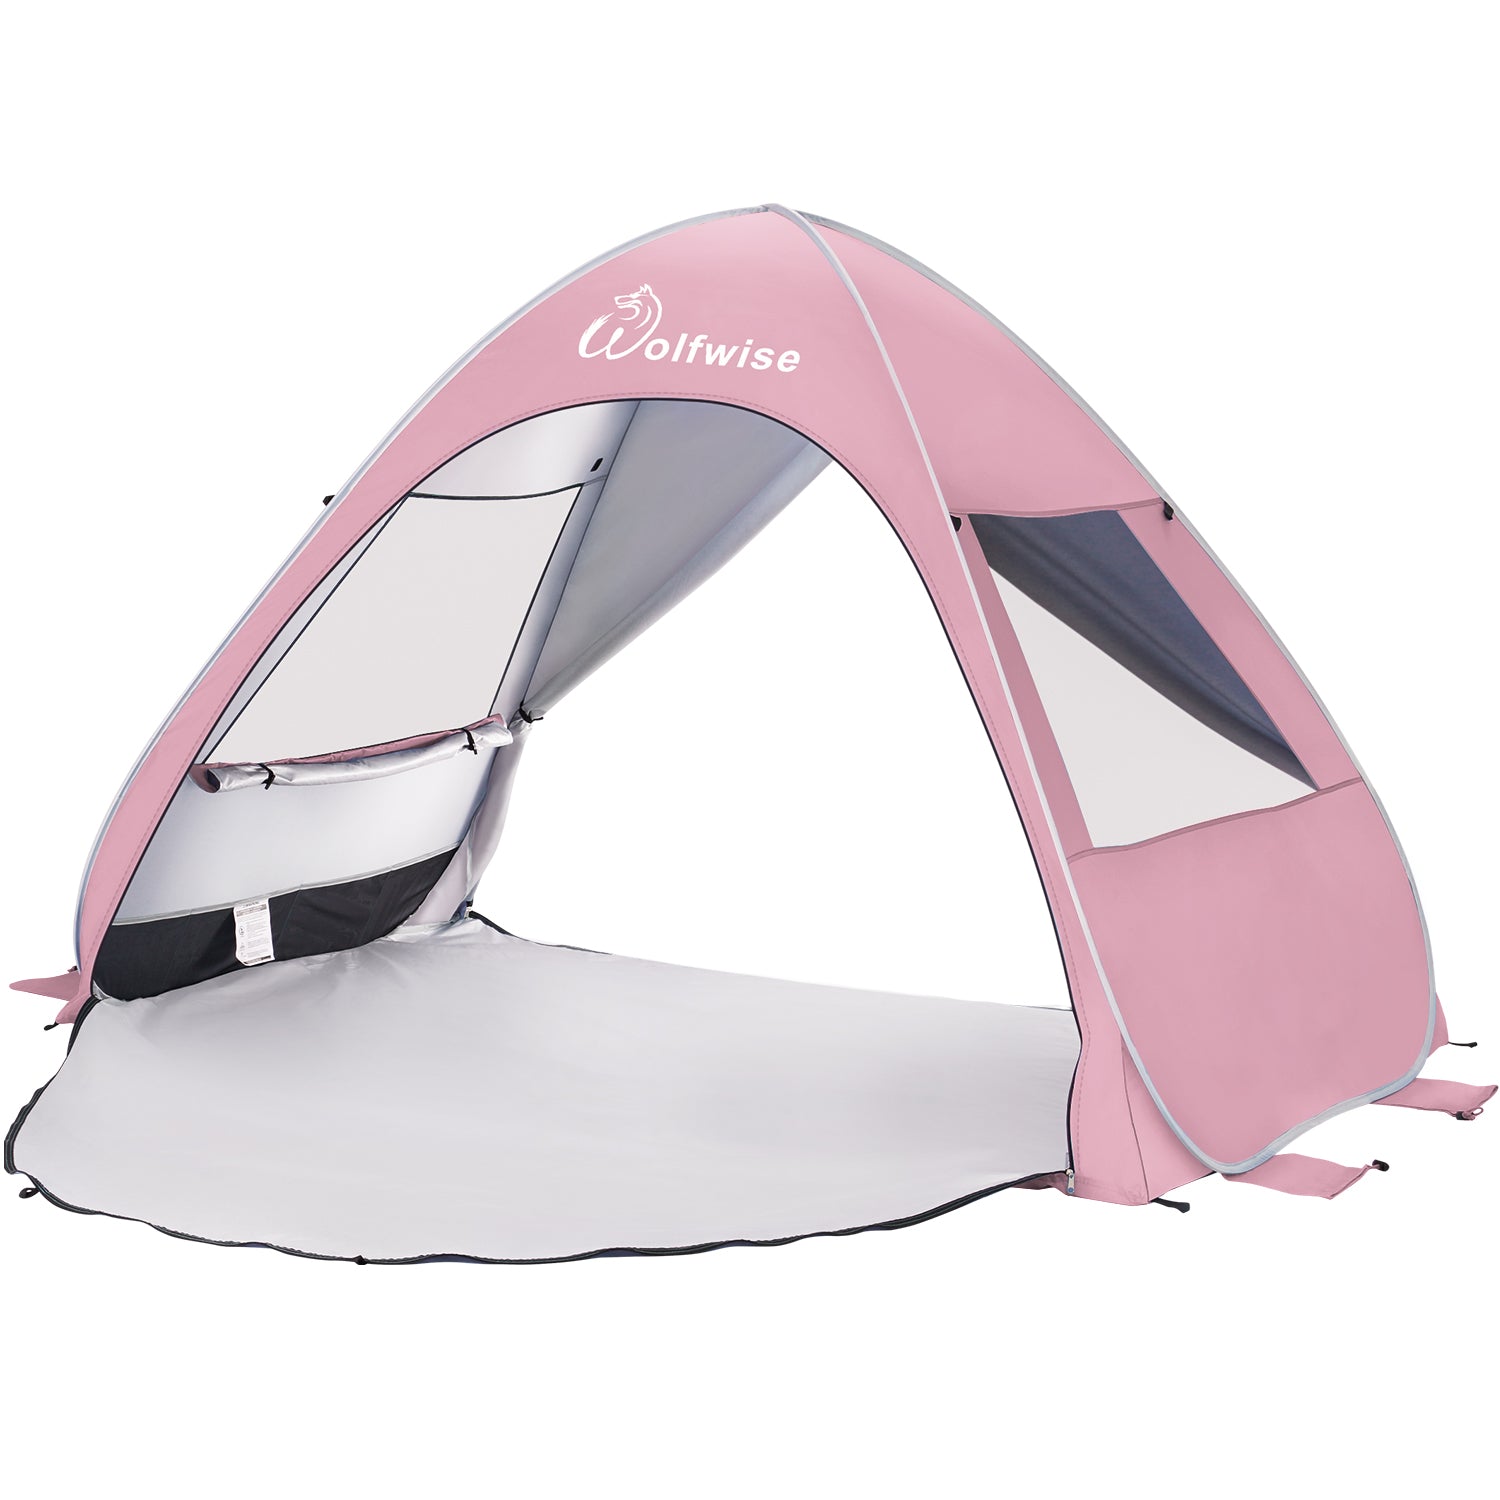 WolfWise AquaBreeze A20 Instant Pop-up Beach Tent Pink